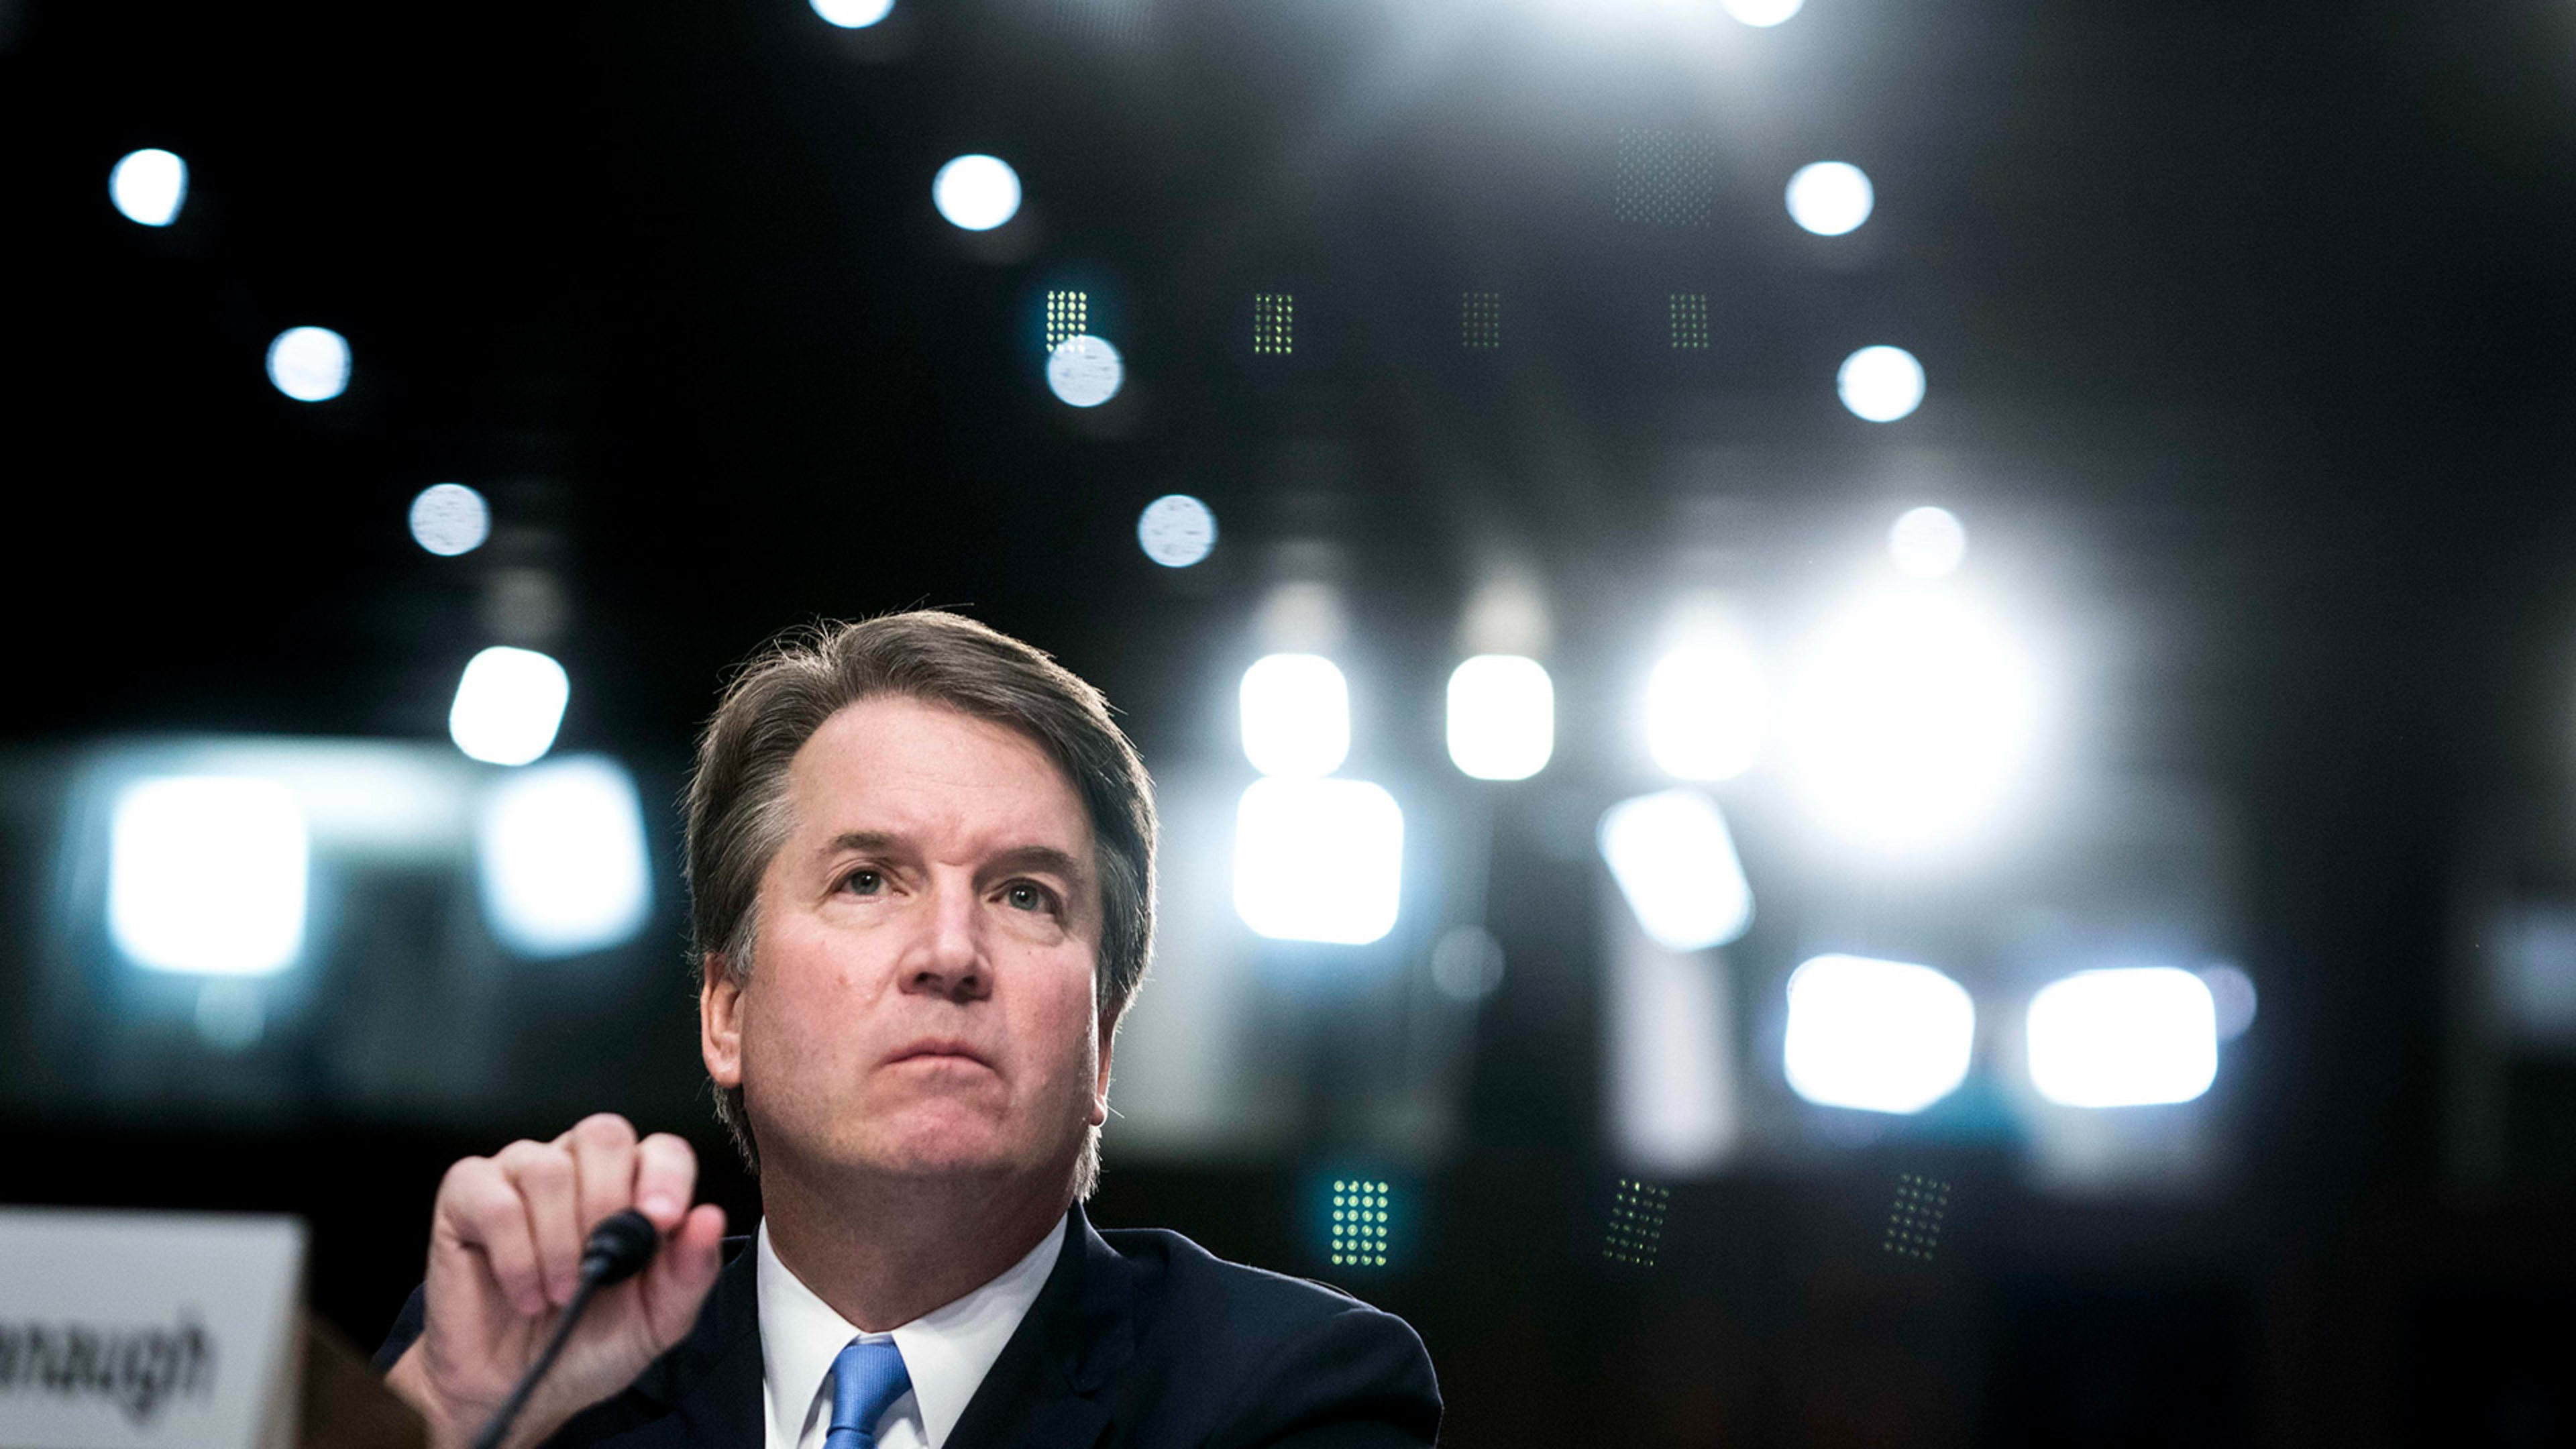 From Clarence Thomas to Kavanaugh: Why we’re still asking the wrong questions